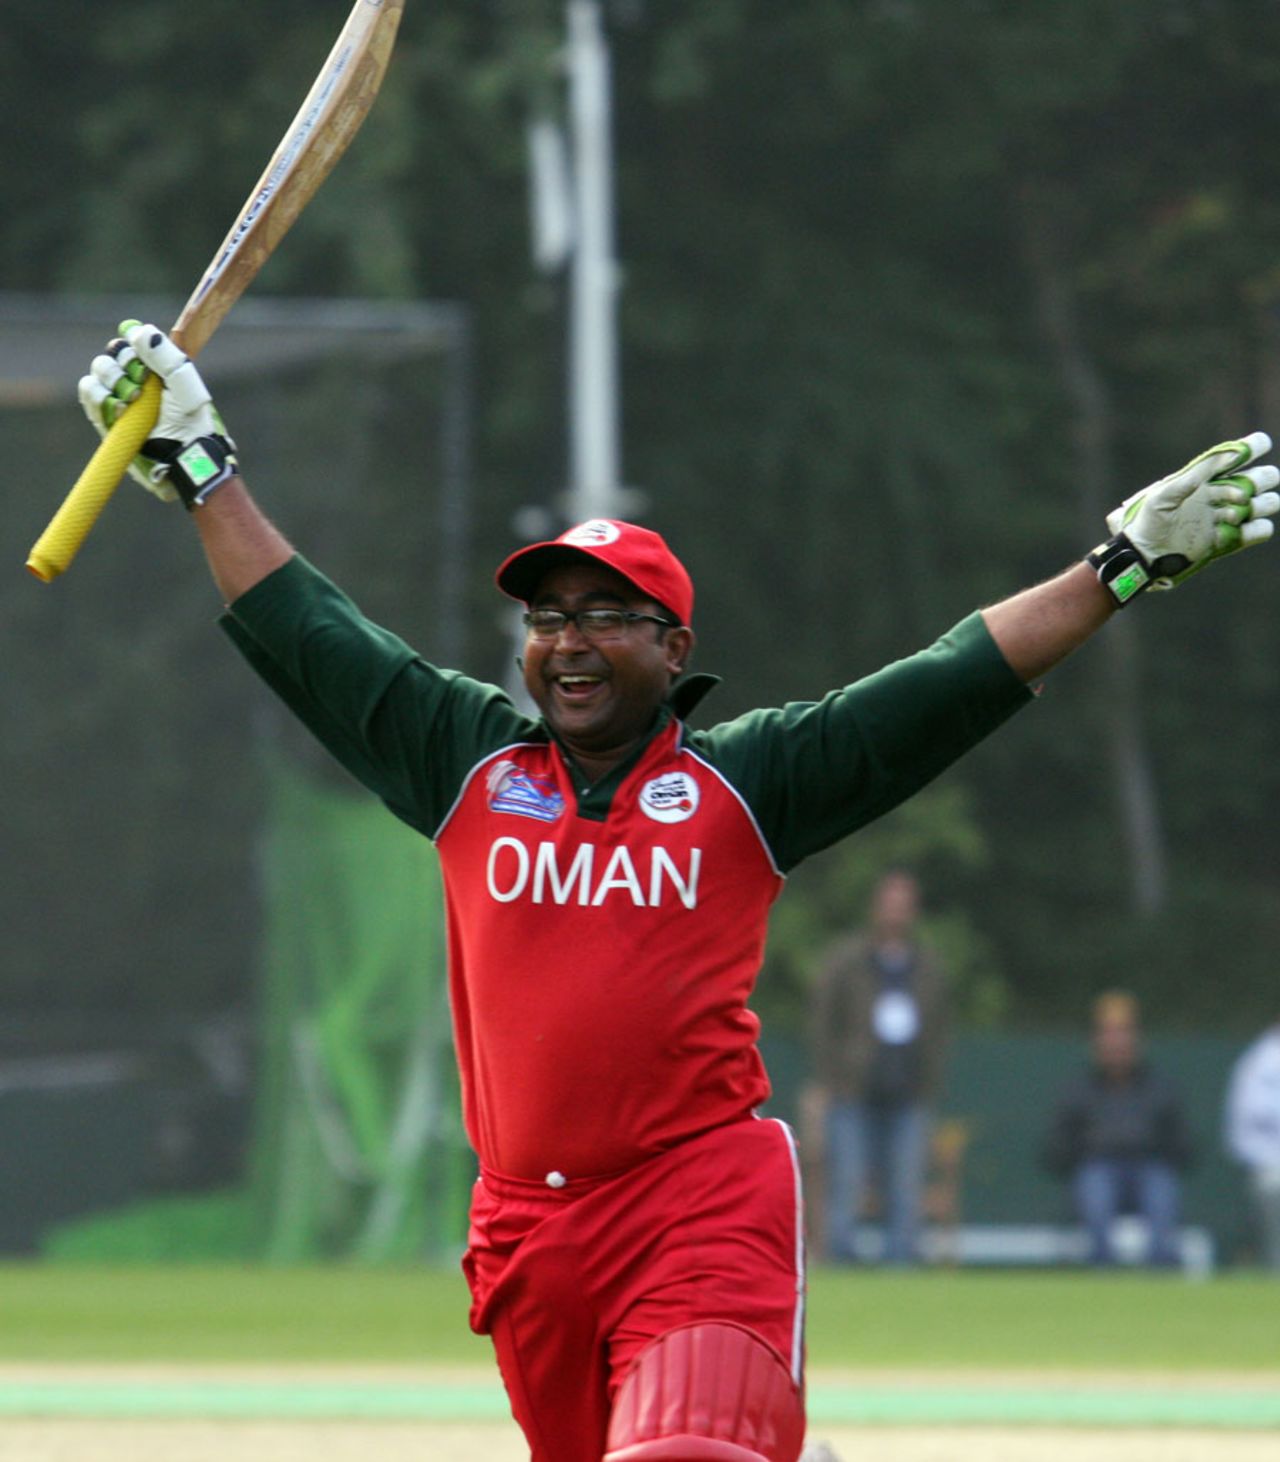 Amir Ali is ecstatic after scoring the winning runs in a tense finish, Italy v Oman, WCL Division 3, Kowloon, January 25, 2011